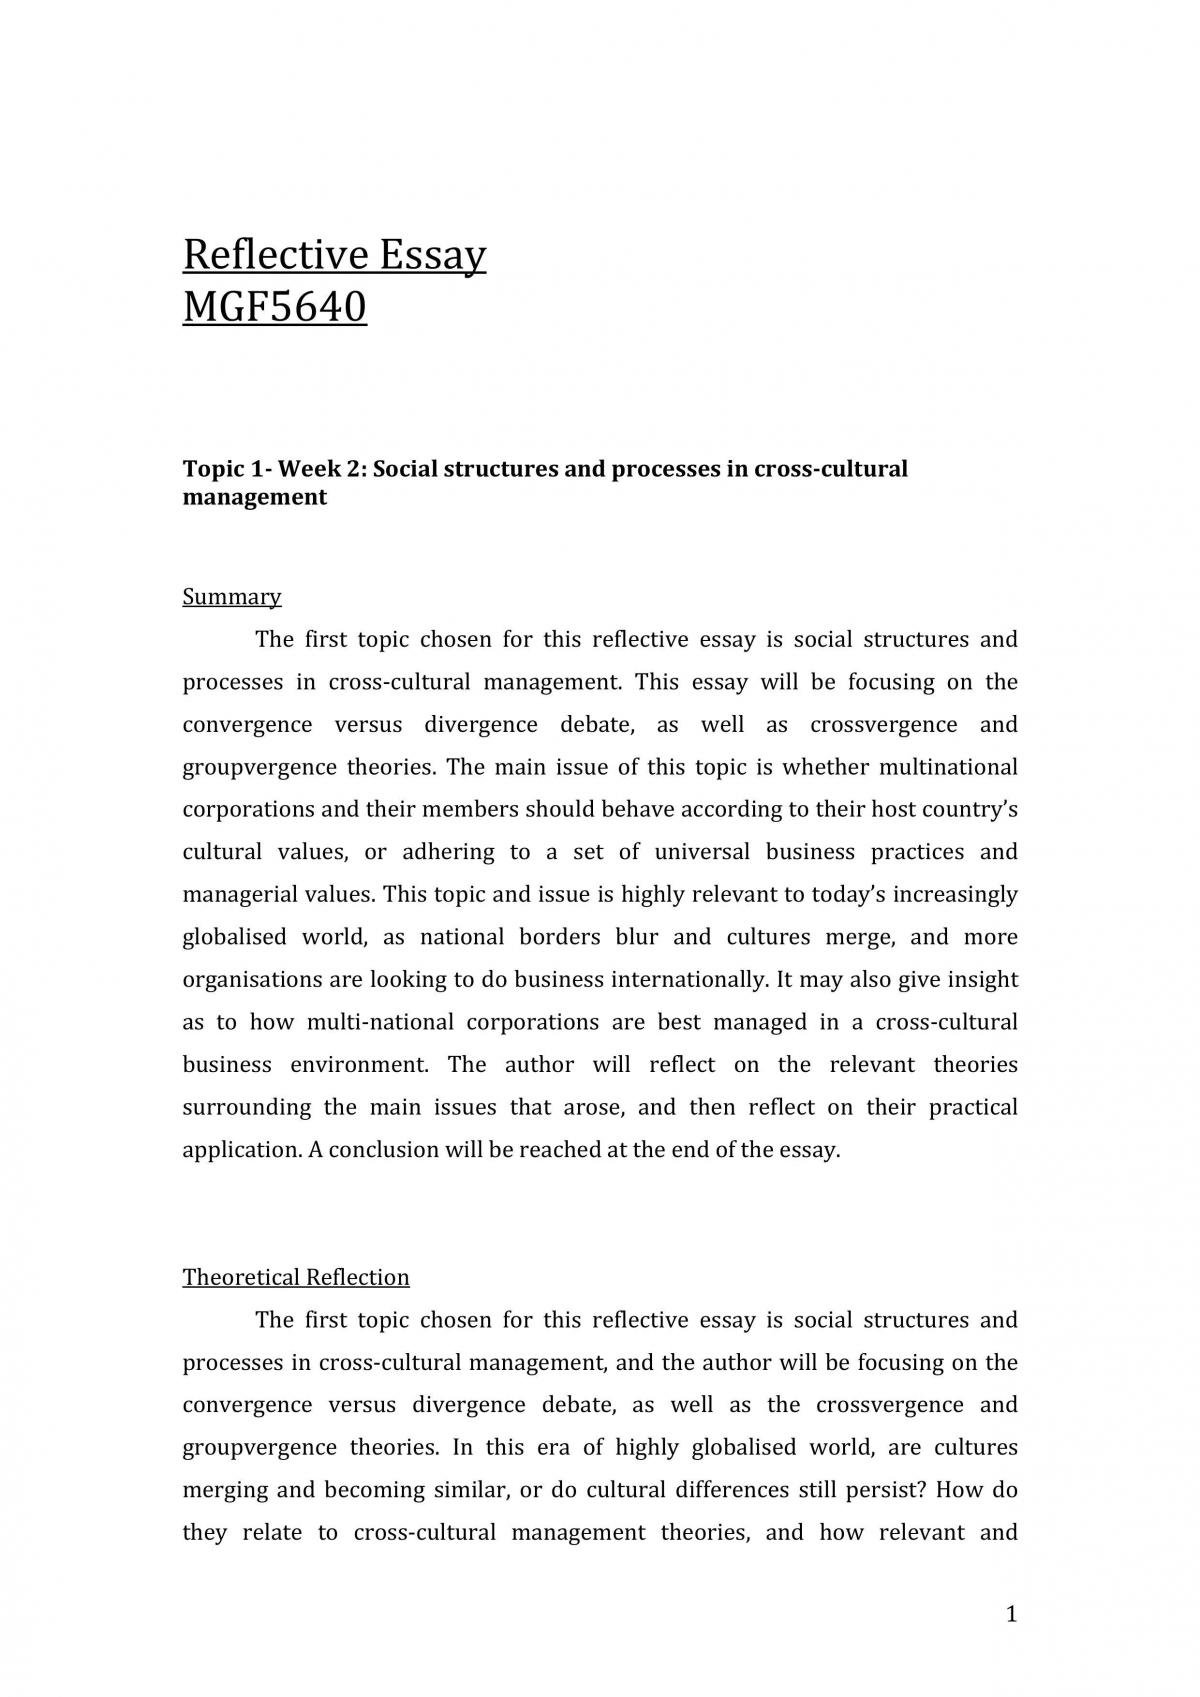 MGF5640 Reflective Essay - Page 1